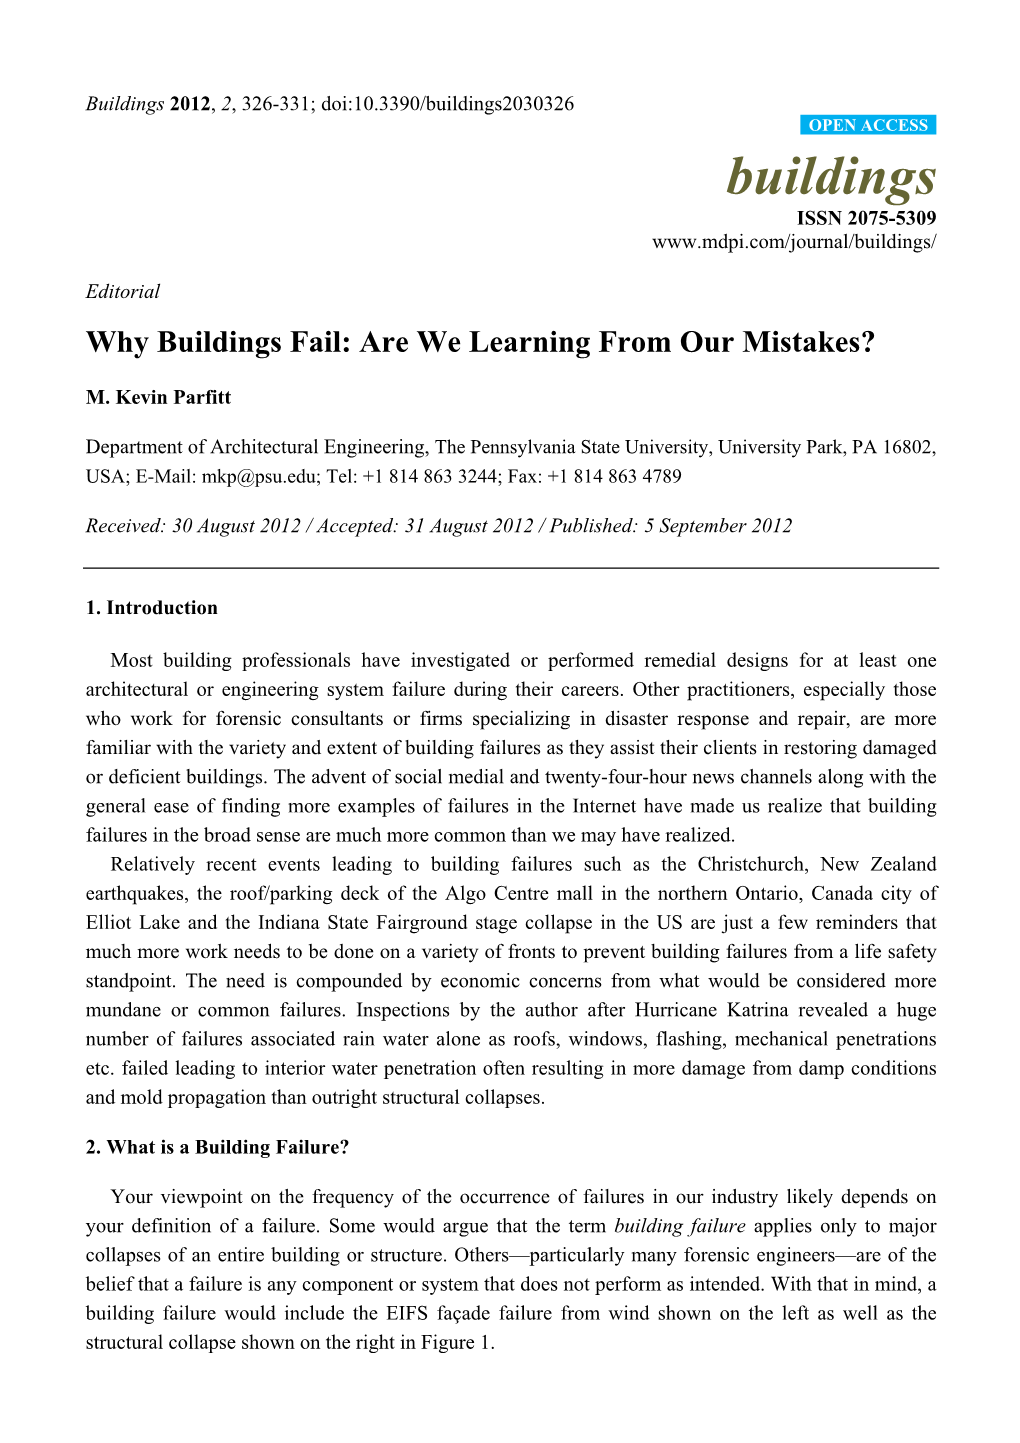 Why Buildings Fail: Are We Learning from Our Mistakes?